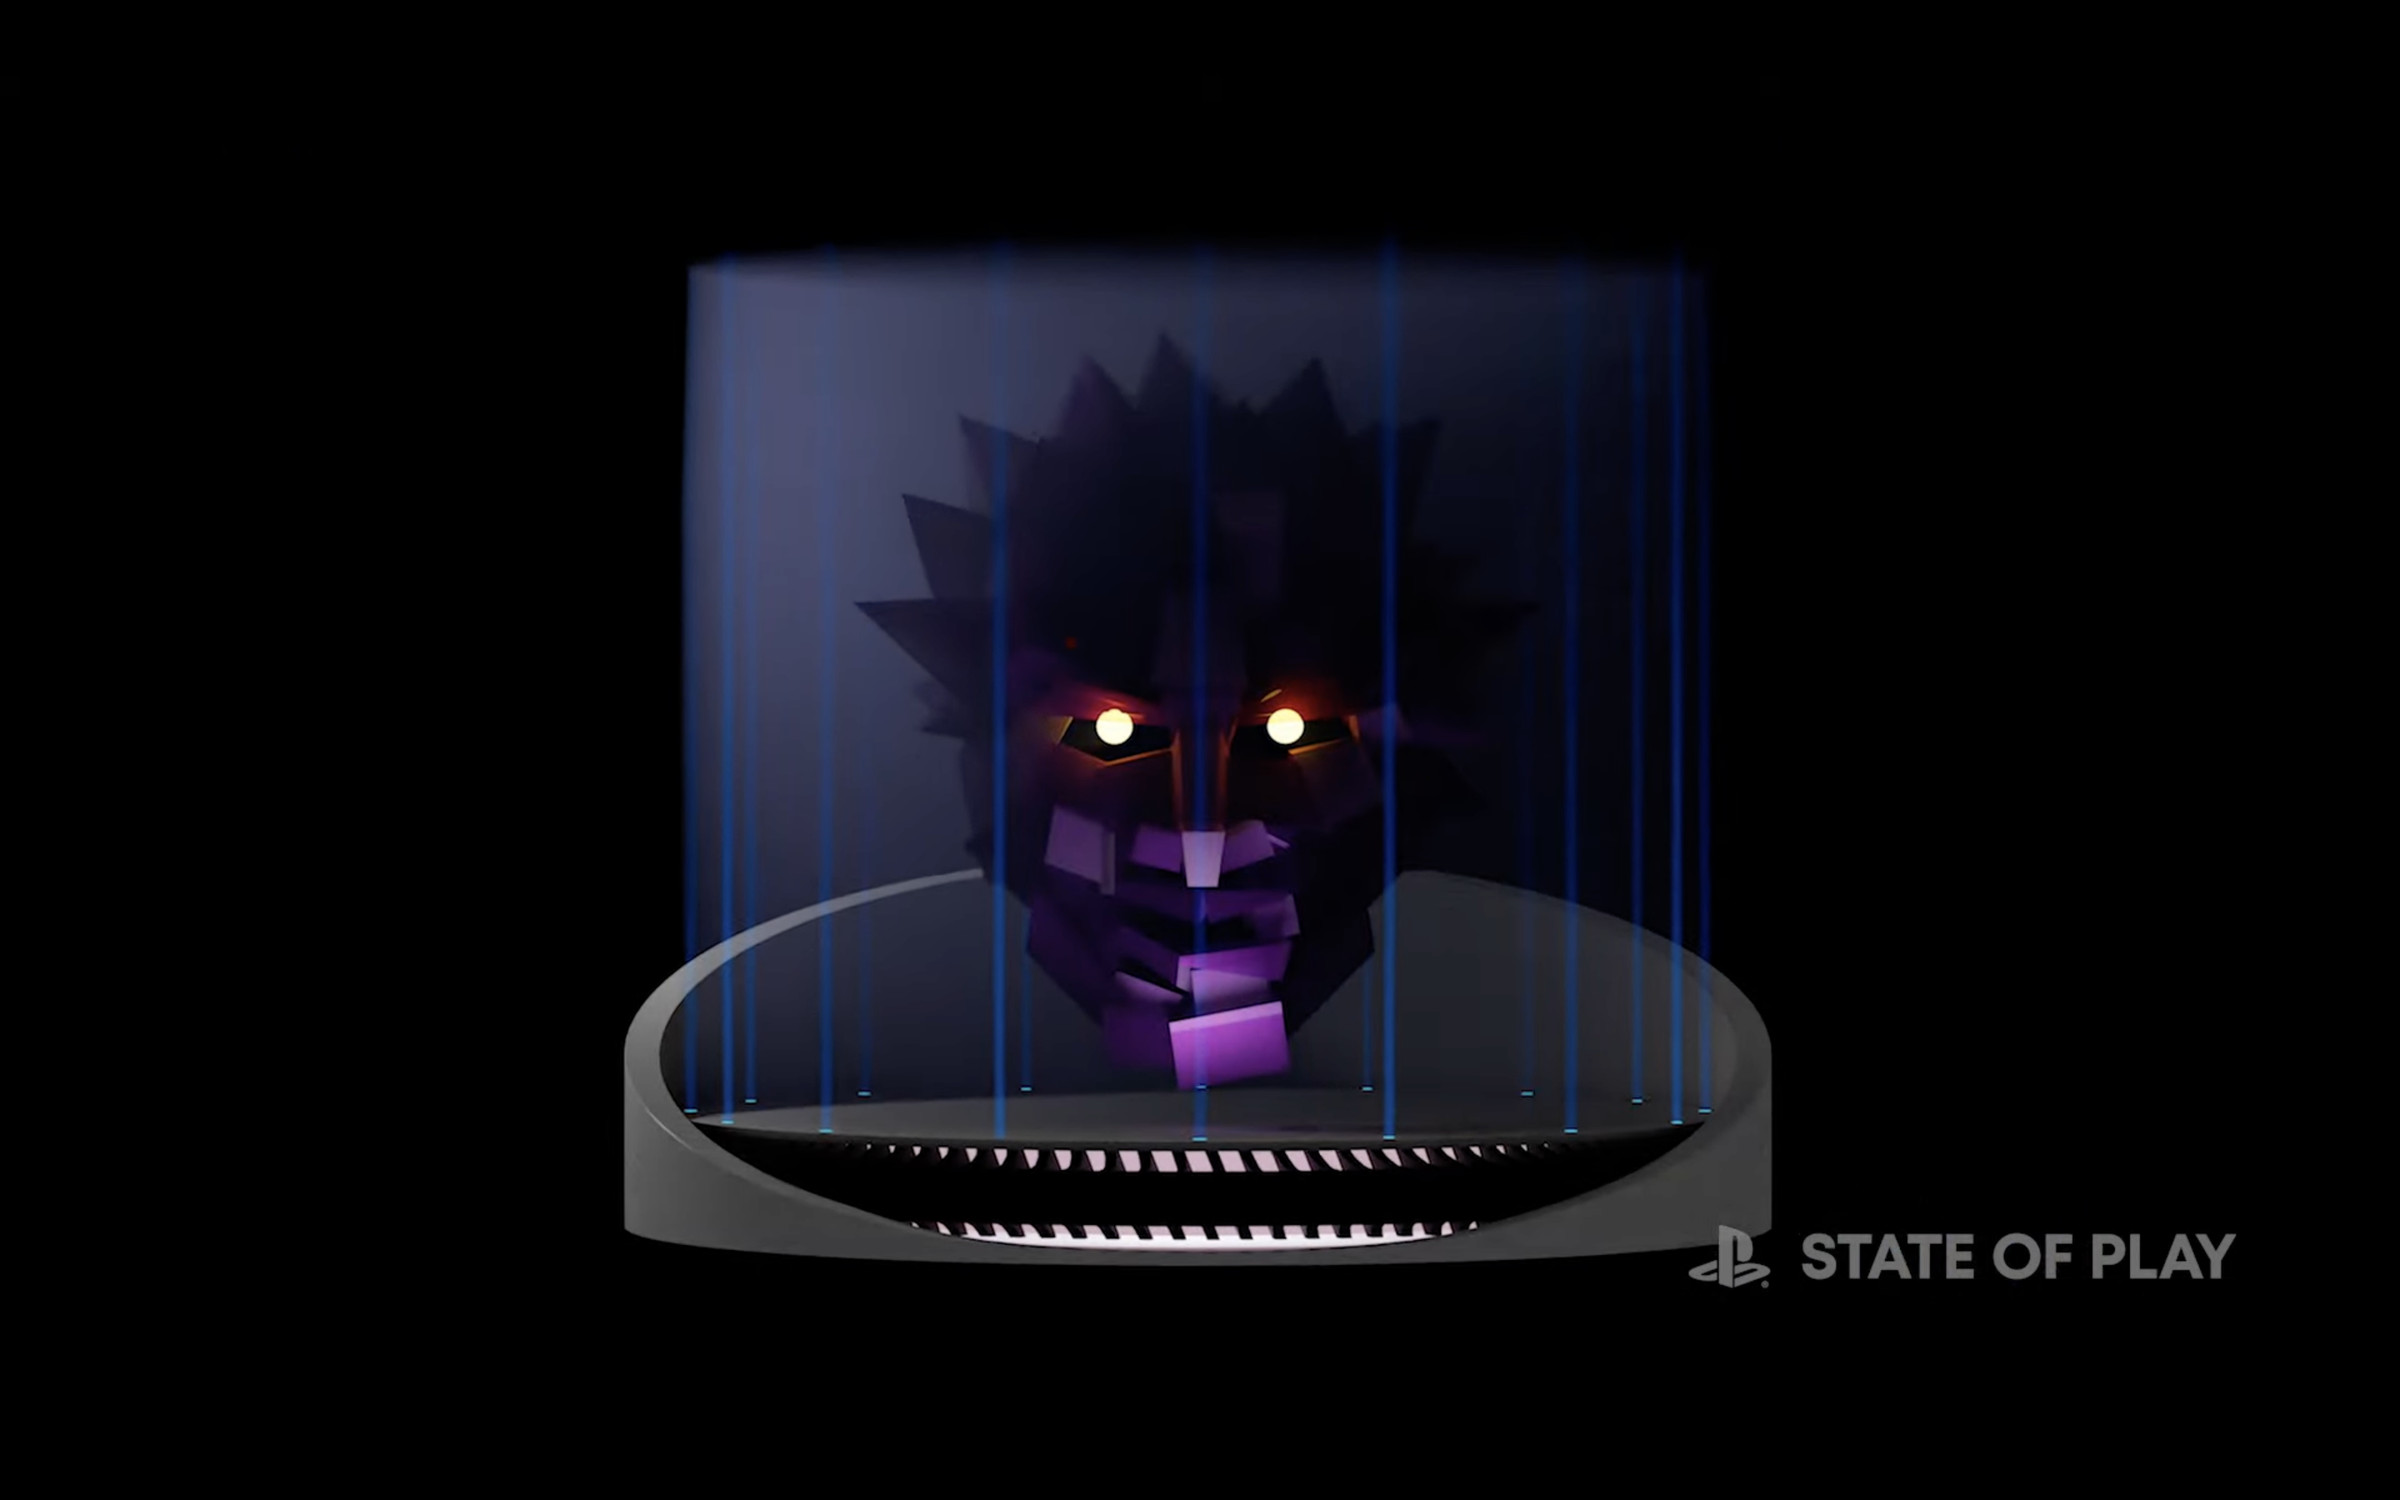 Image of a human-like face with spiky hair peering out from the darkness.